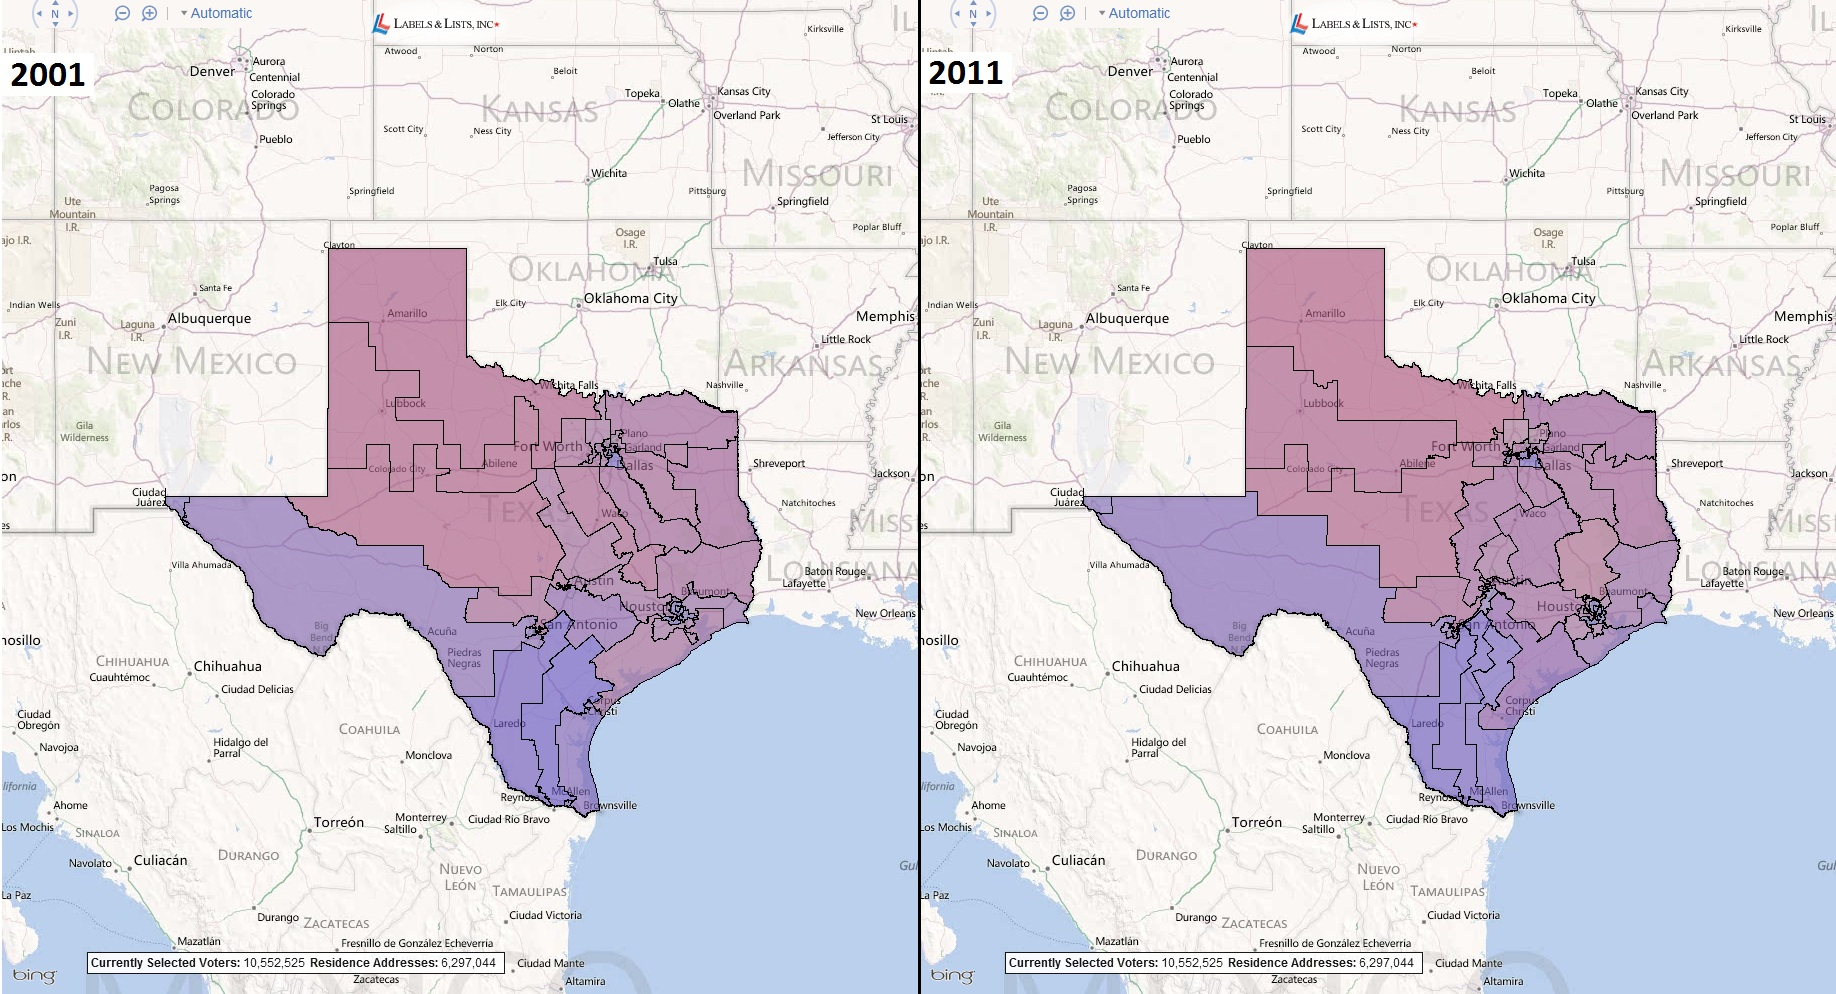 Texas Congressional Districts: Comparison 2001-2011 - Texas Congressional District Map